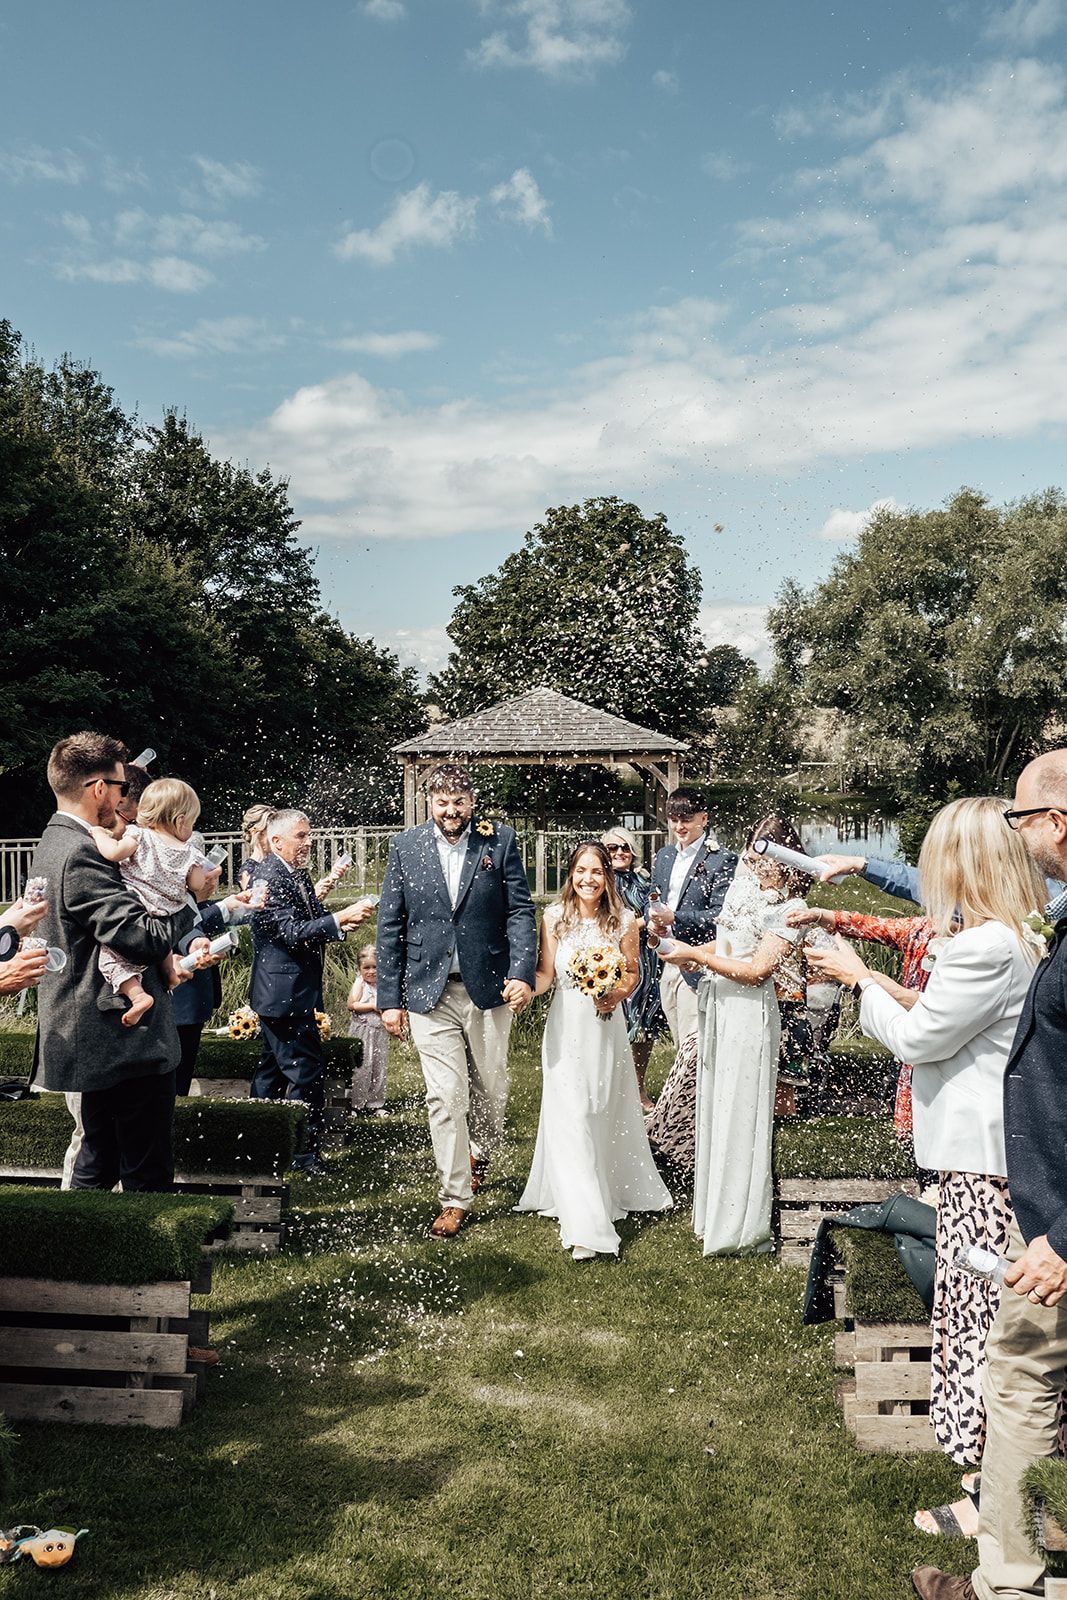 Incredible confetti photo as couple walk down the aisle after their ceremony on the lake at Furtho Manor Farm. Photo thanks to Francesca Checkley Photography.